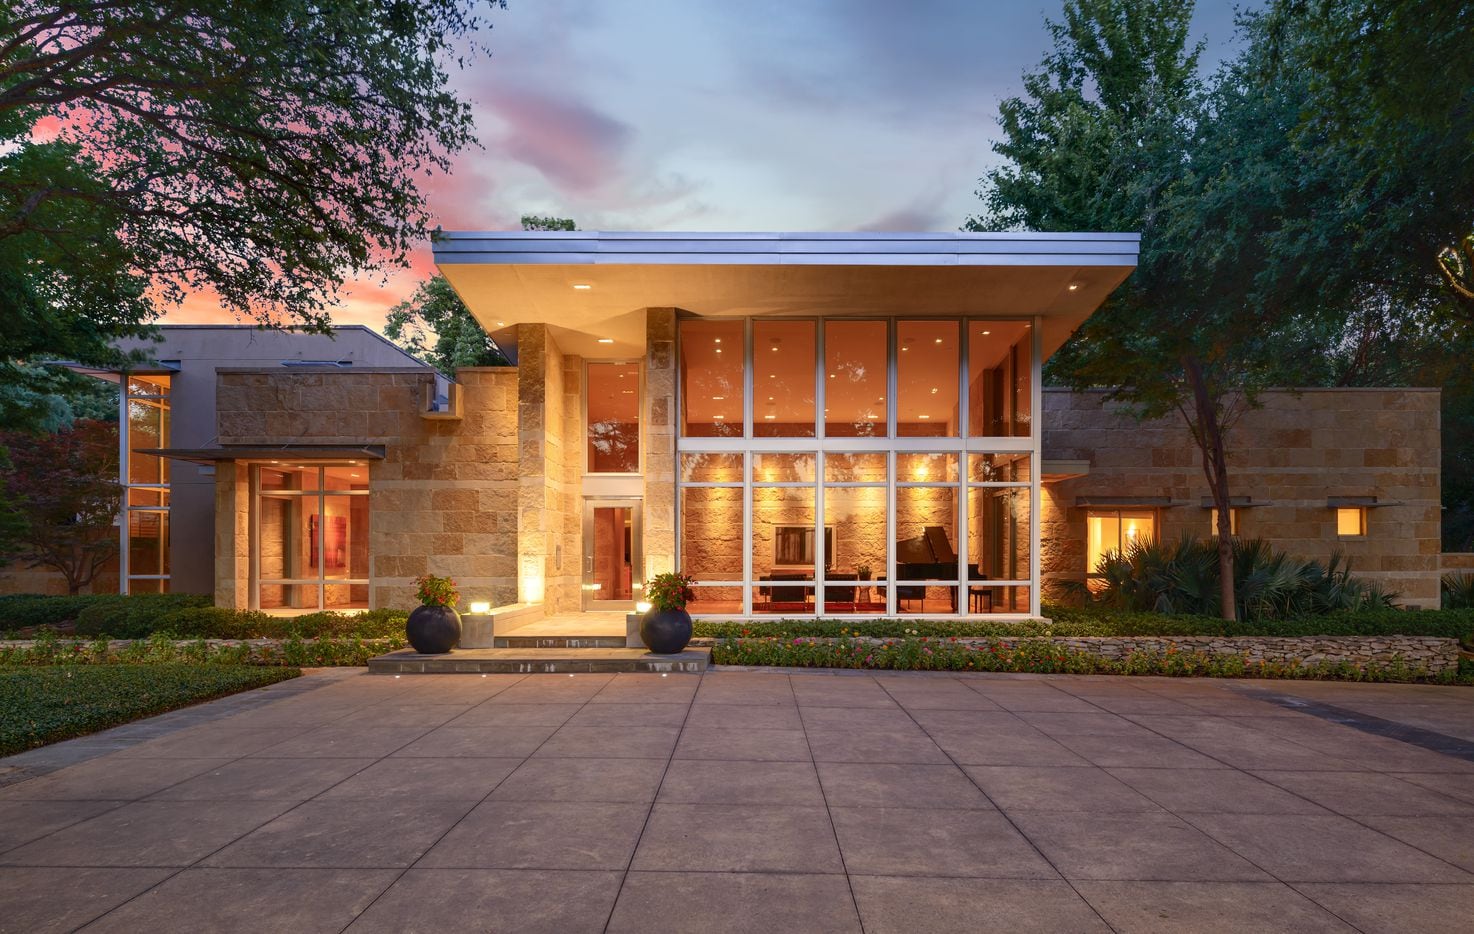 This 6,886-square-foot house at 5006 Shadywood in Dallas' Bluffview neighborhood was built for sustainable living by Ralph Hawkins, former president and CEO of architecture firm HKS Inc.